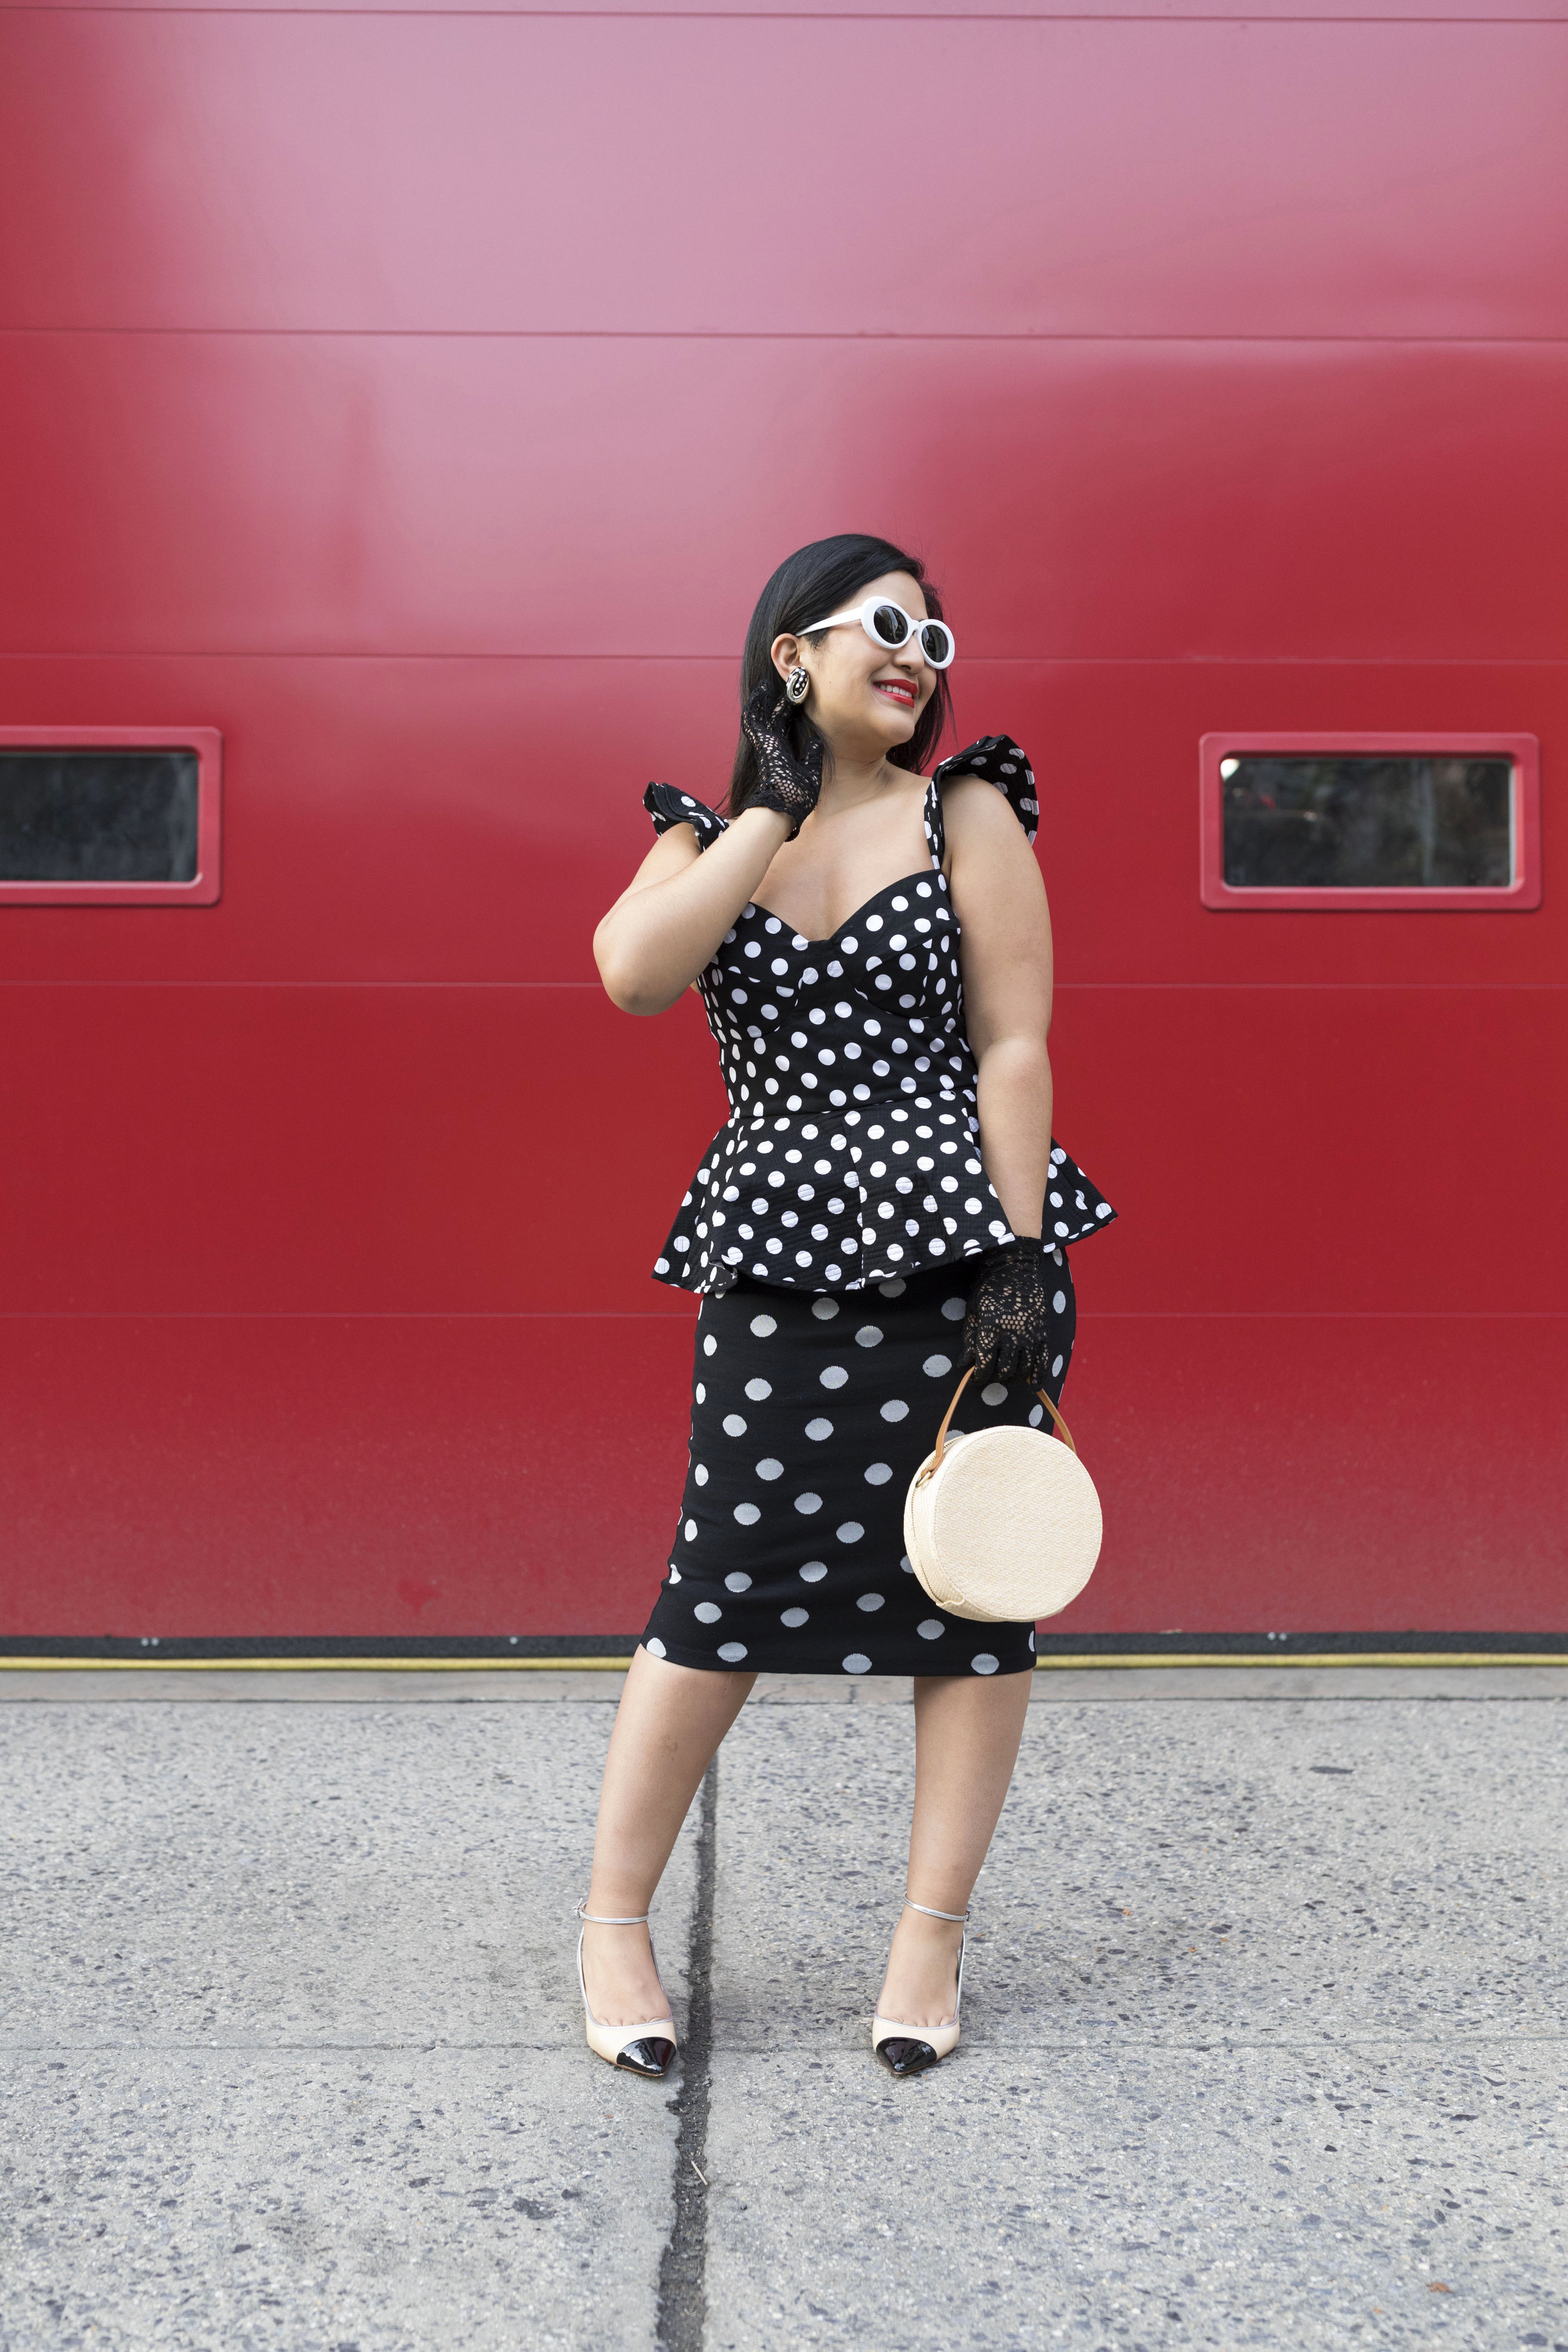 Krity S x Polka Dots x Spring Outfit2.jpg